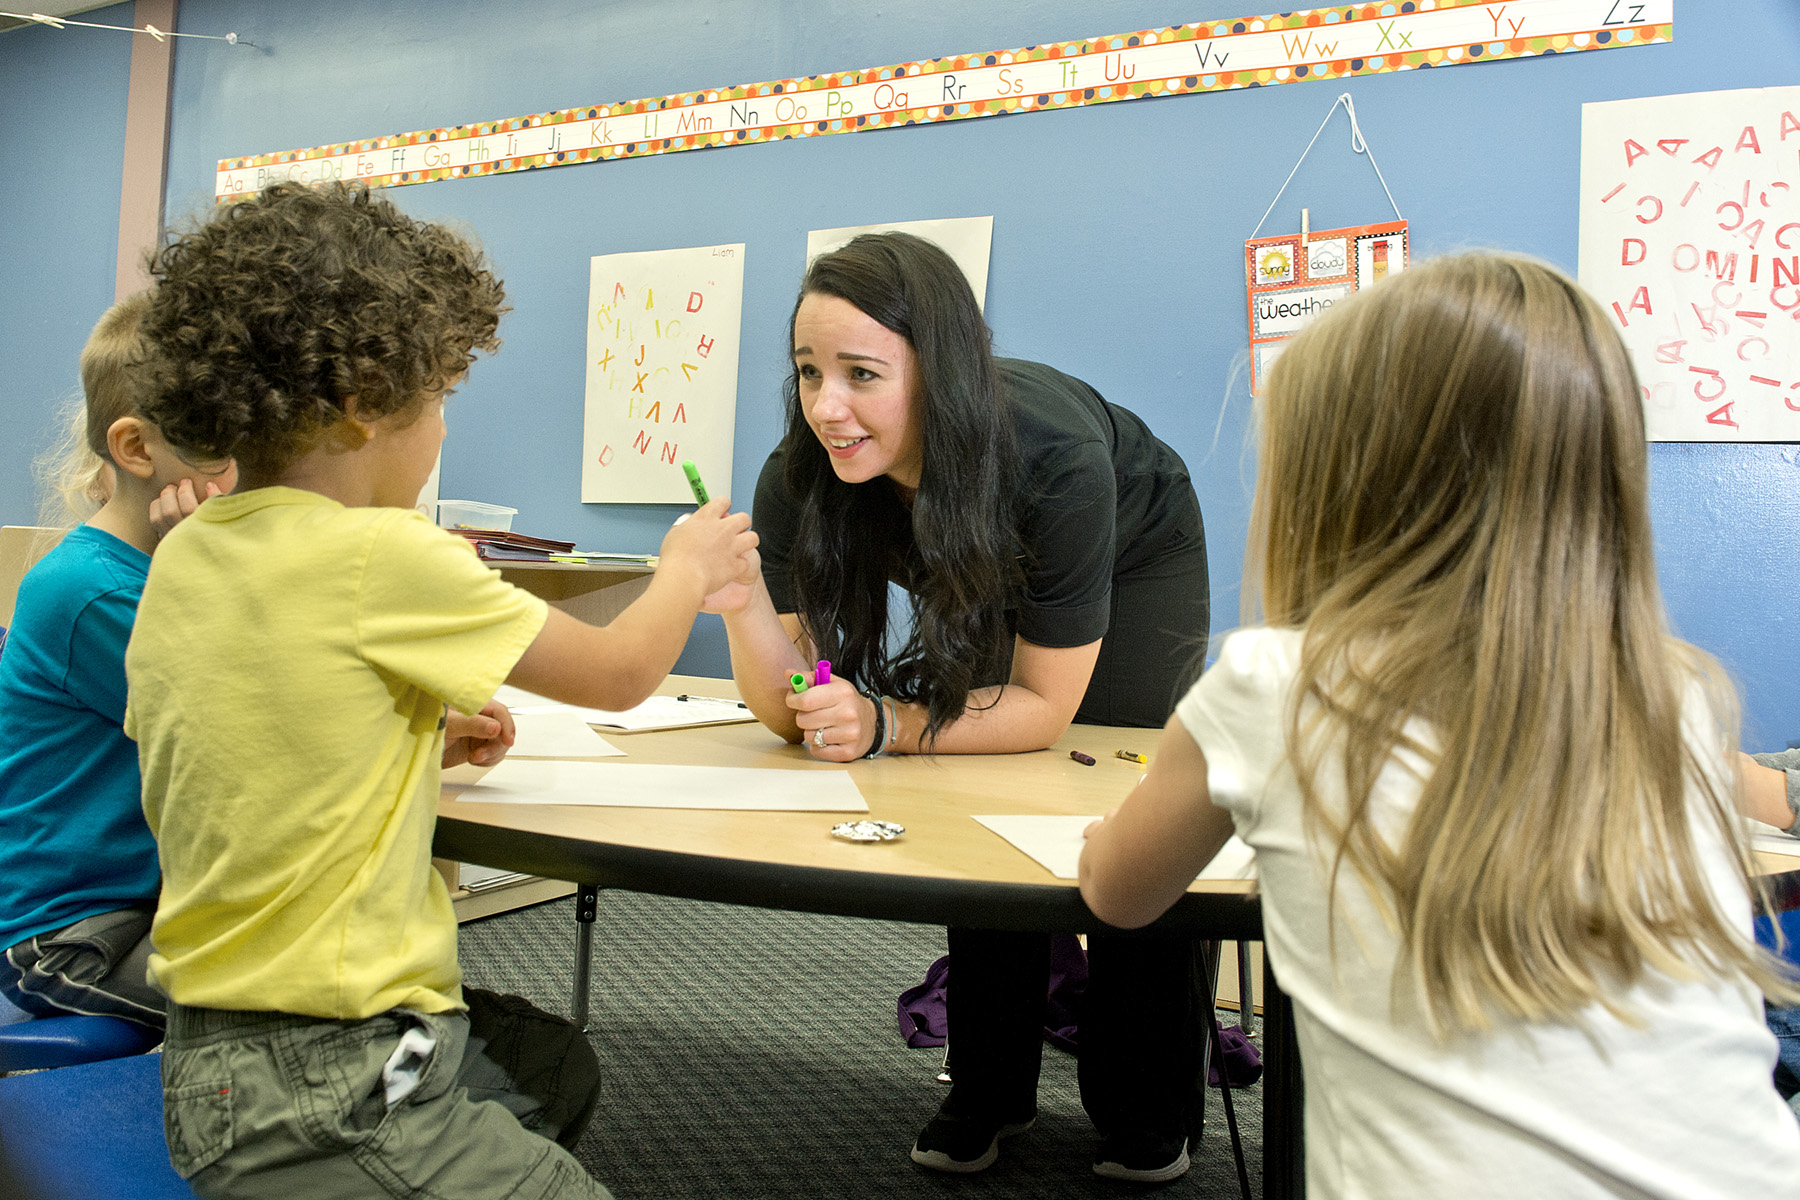 Mount Union student leans over table to assist three young children with learning activity